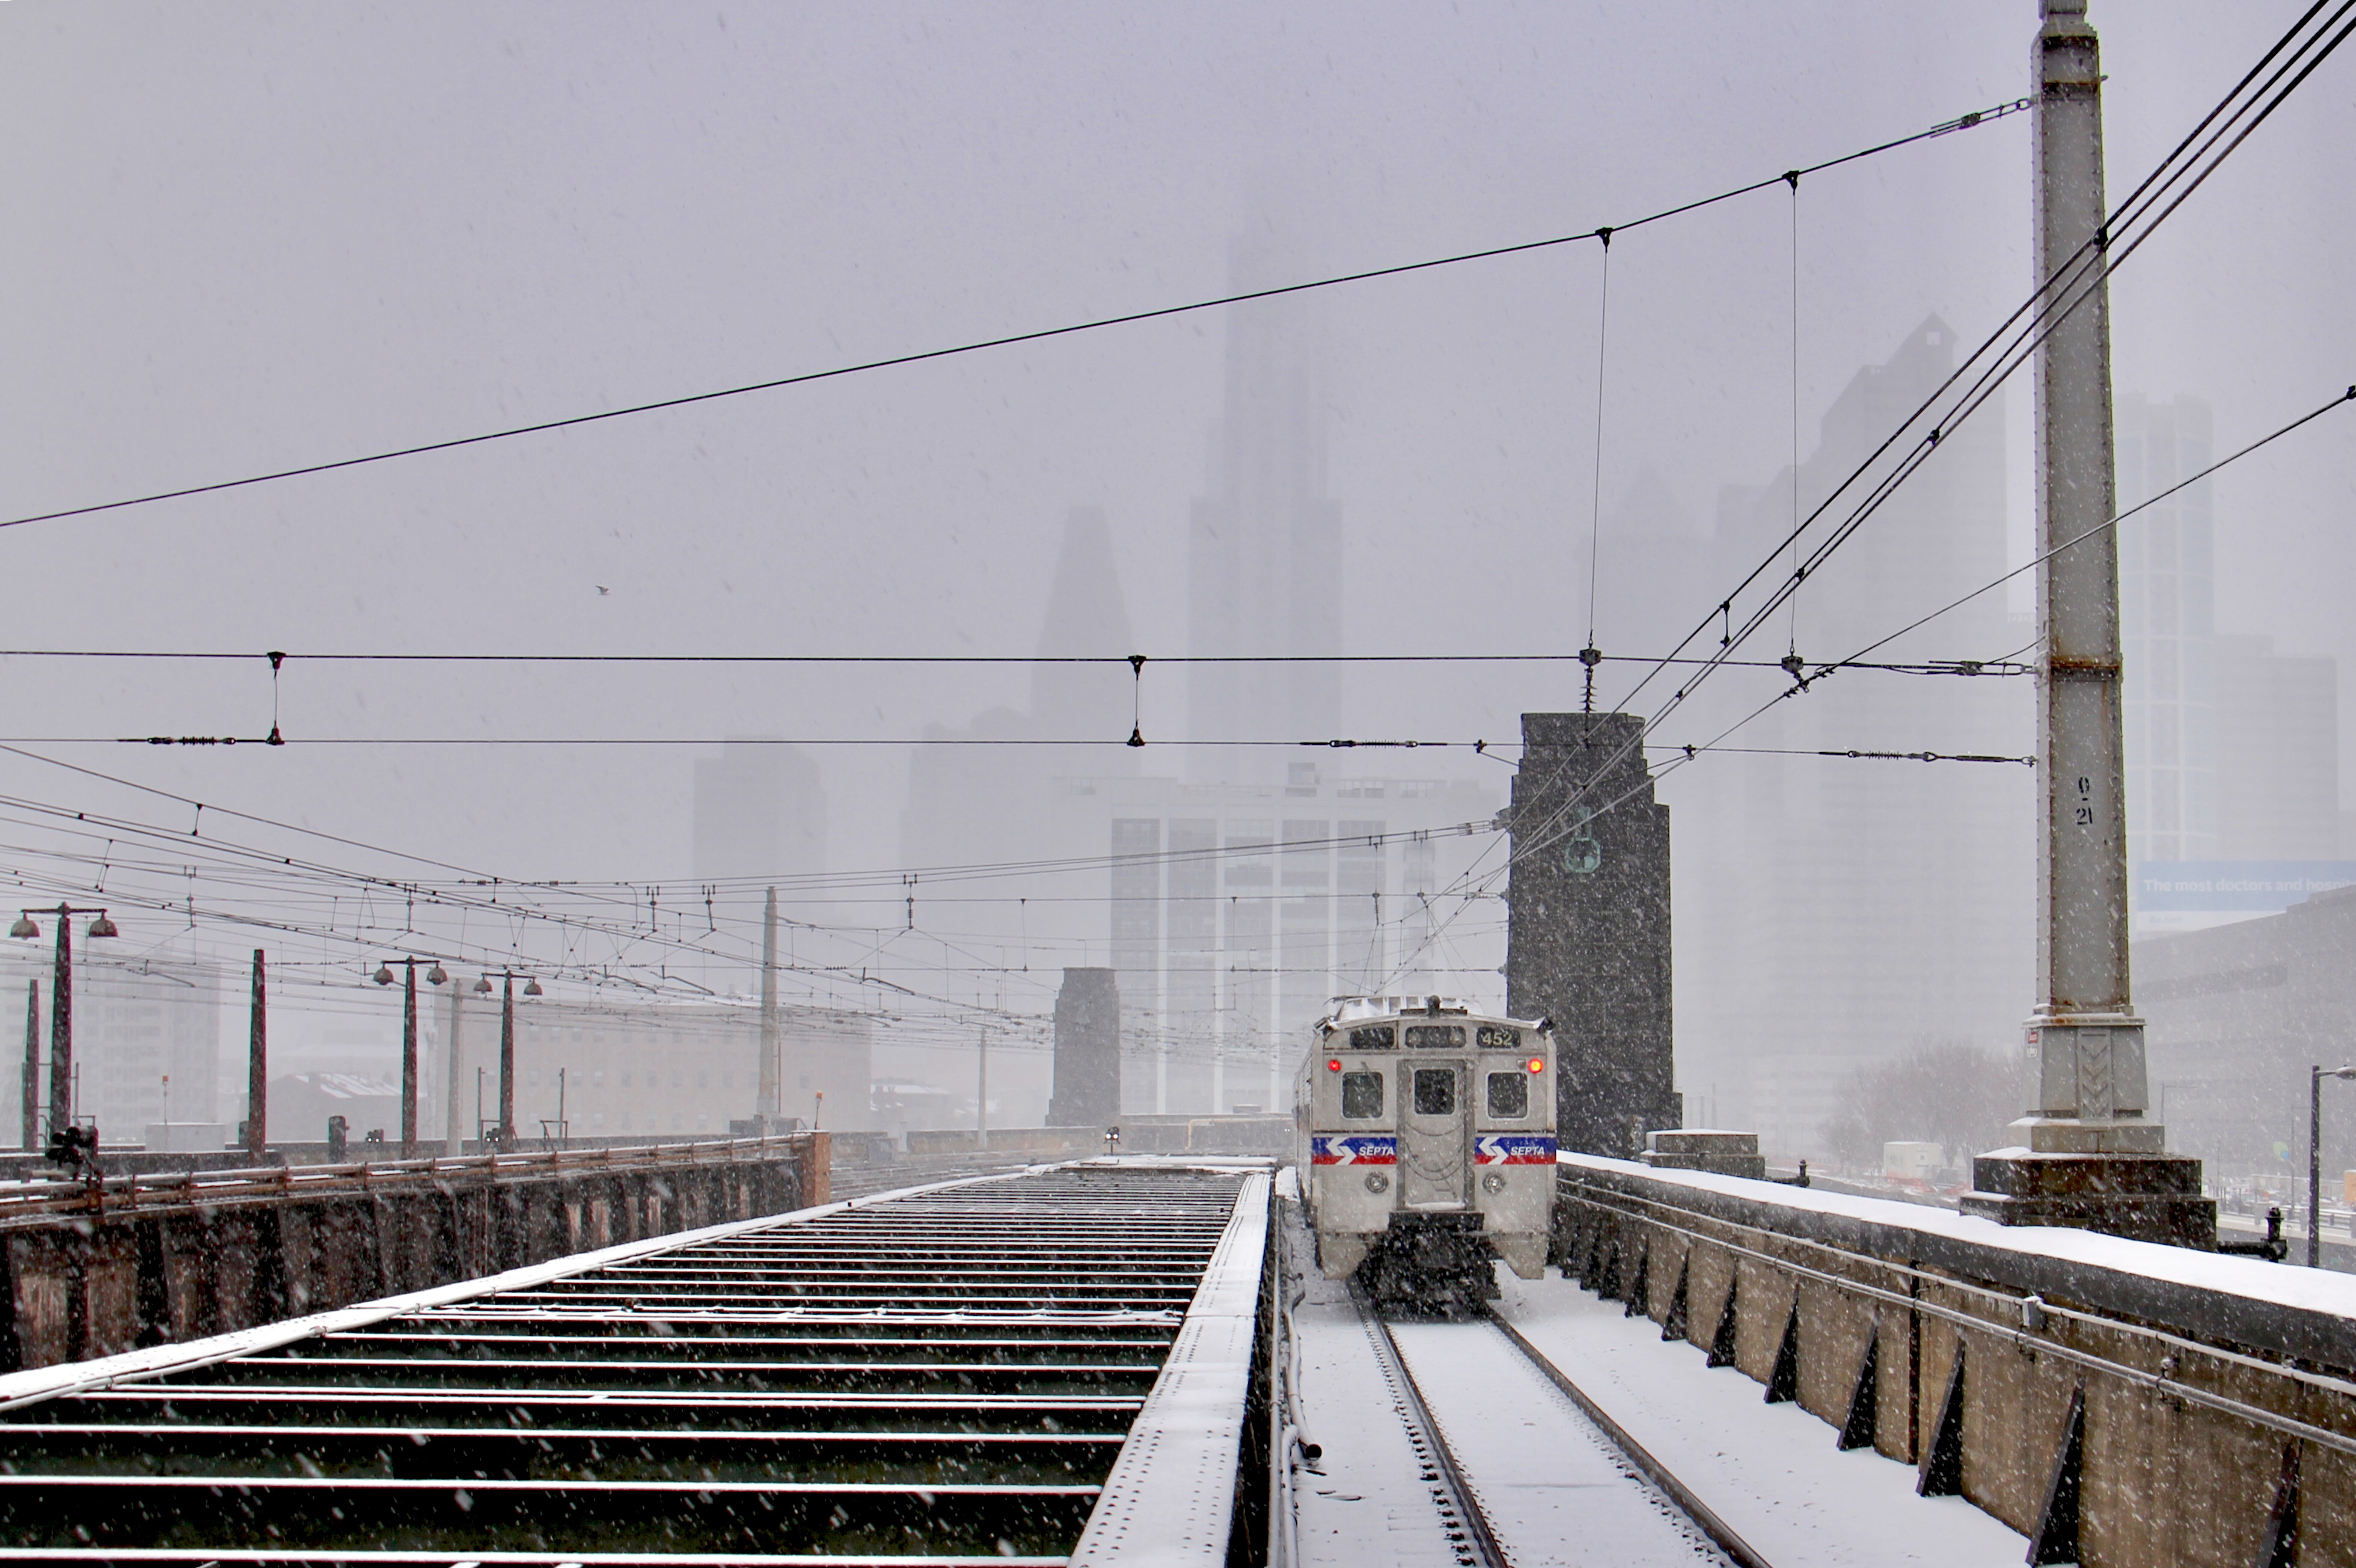 A regional rail train departs 30th Street Station as the snow intensifies. (Emma/Lee/WHYY)